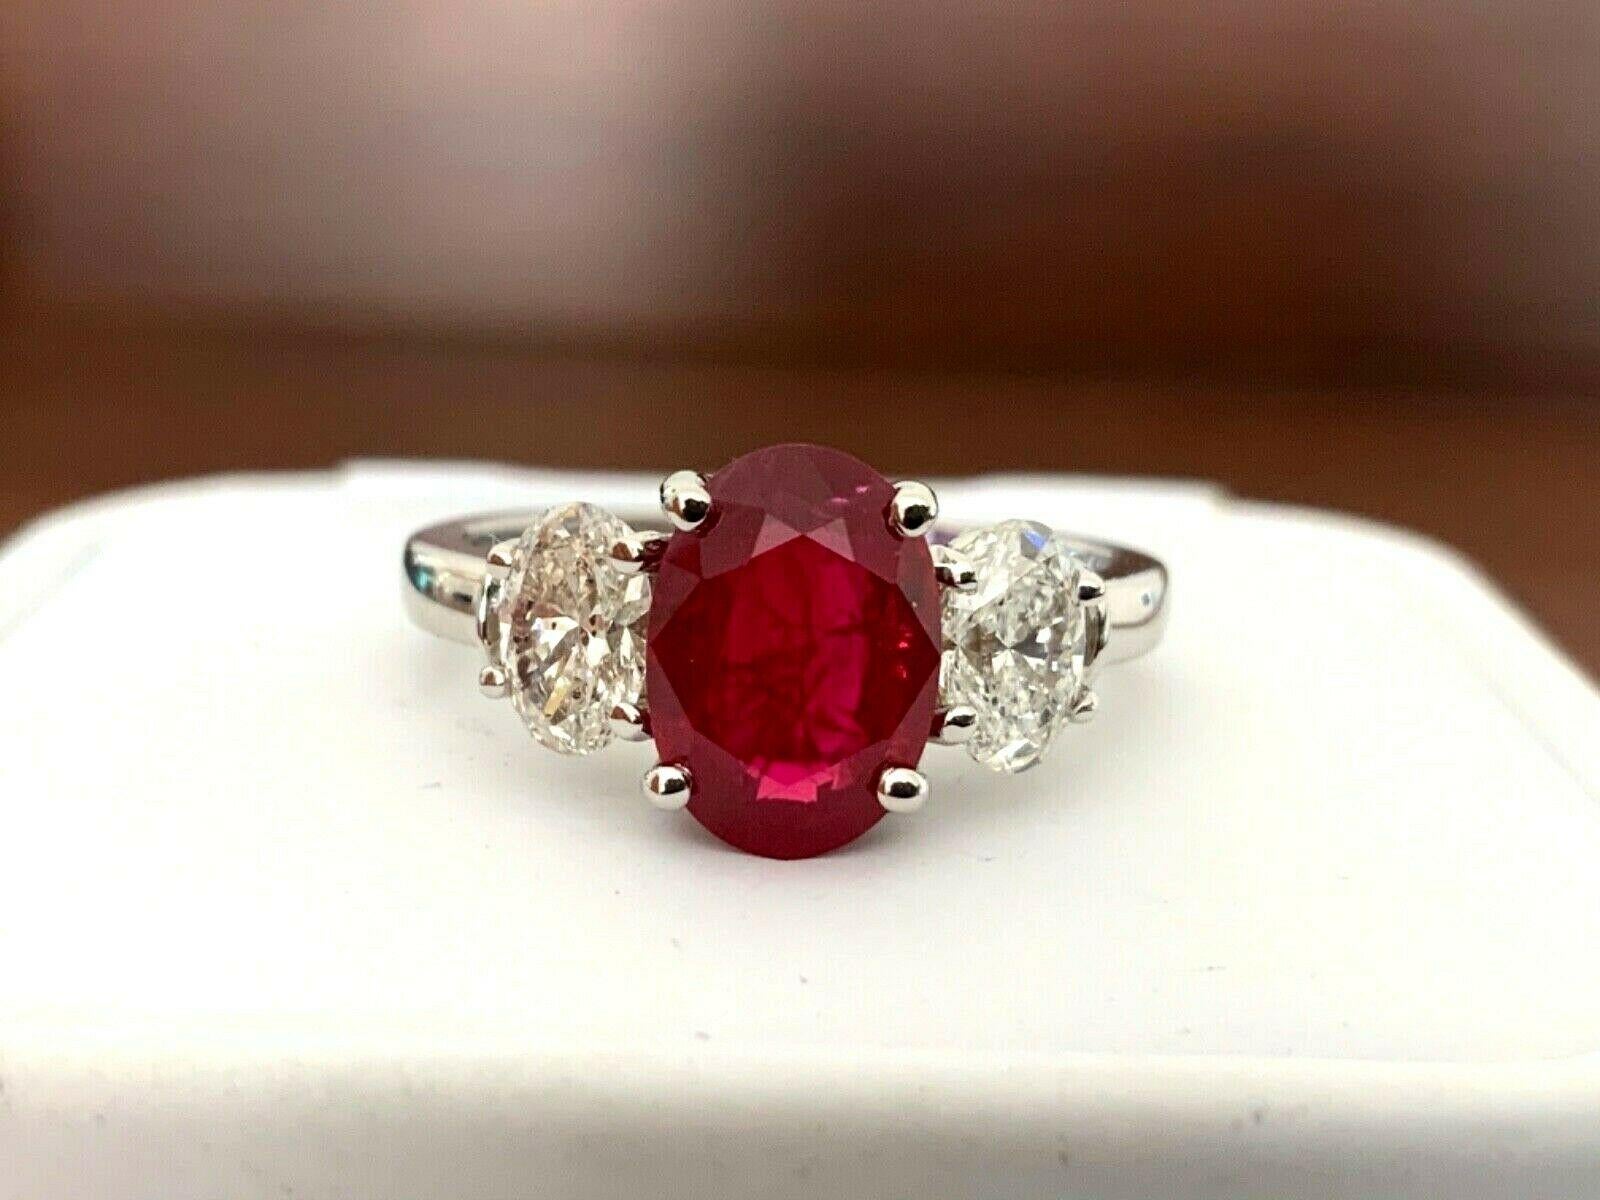 JUST IN TODAY!

Are you looking for a STATEMENT Piece at a great price!  This is the perfect engagement ring or out of this world cocktail ring.  This one will light up a room!  In addition it is a TRUE investment grade being a Natural Burmese Vivid